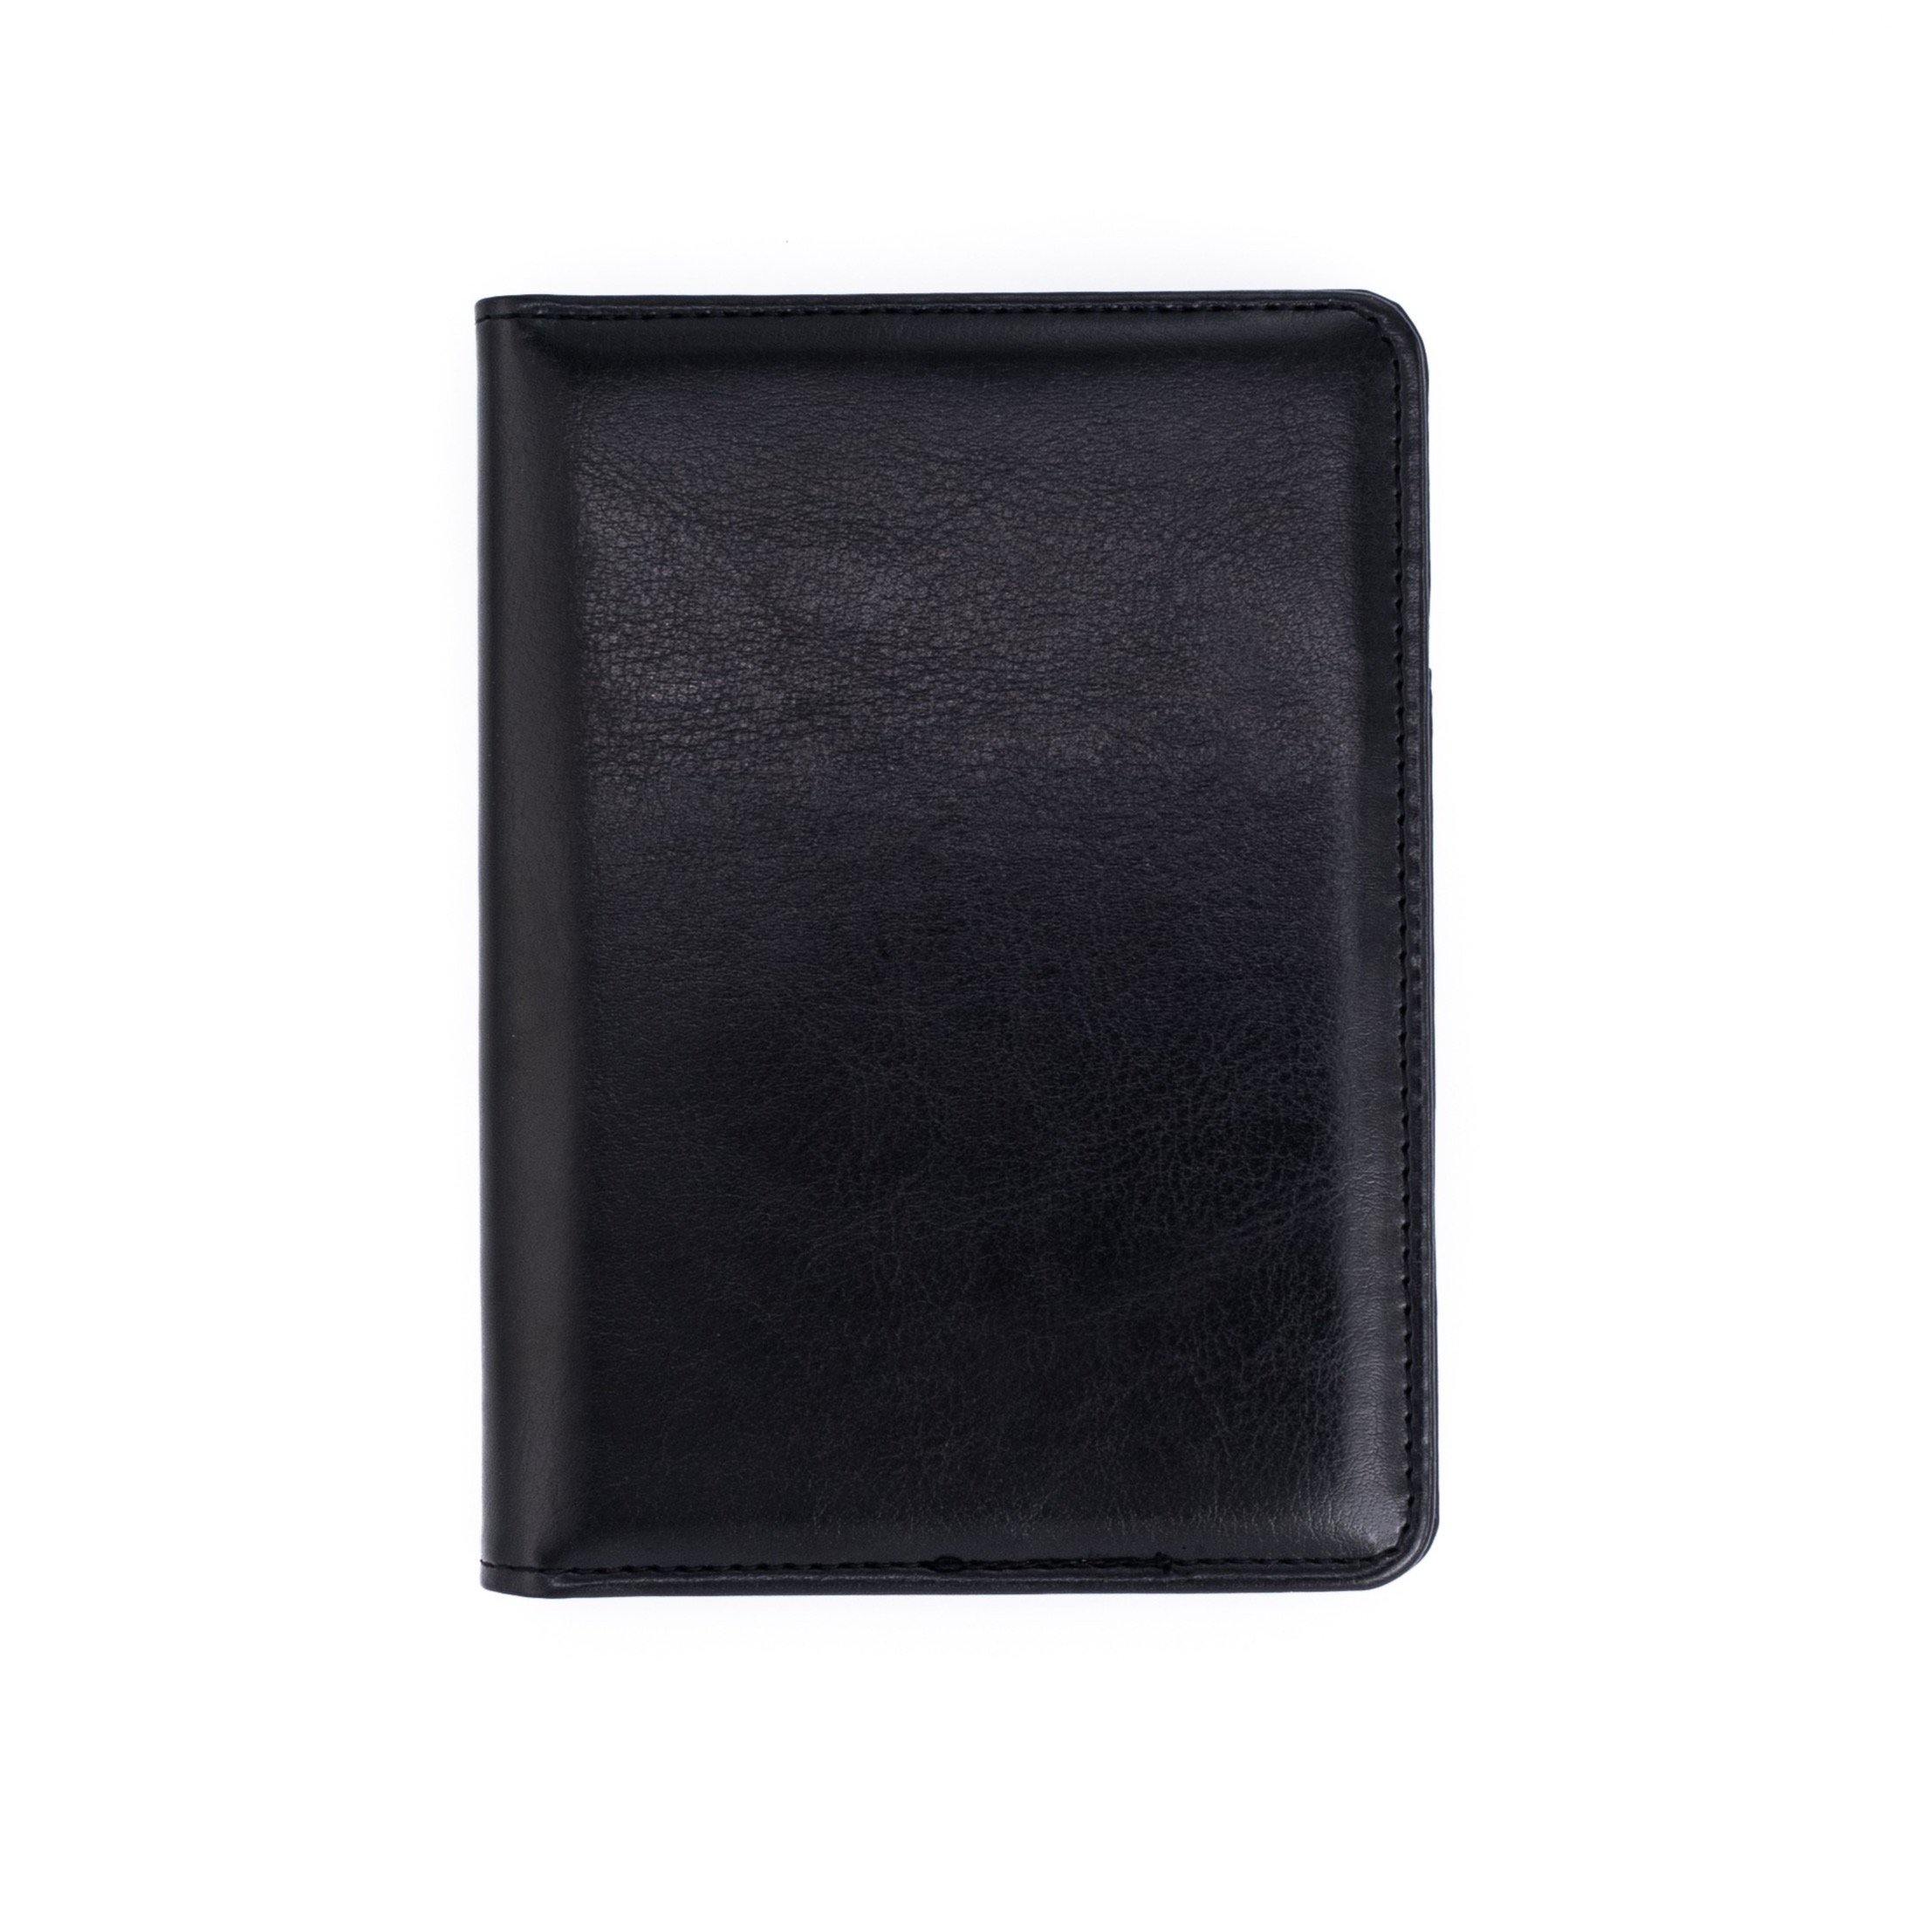 Leather Travel Card holder personalised with name or initials - PersonalisebyLisa